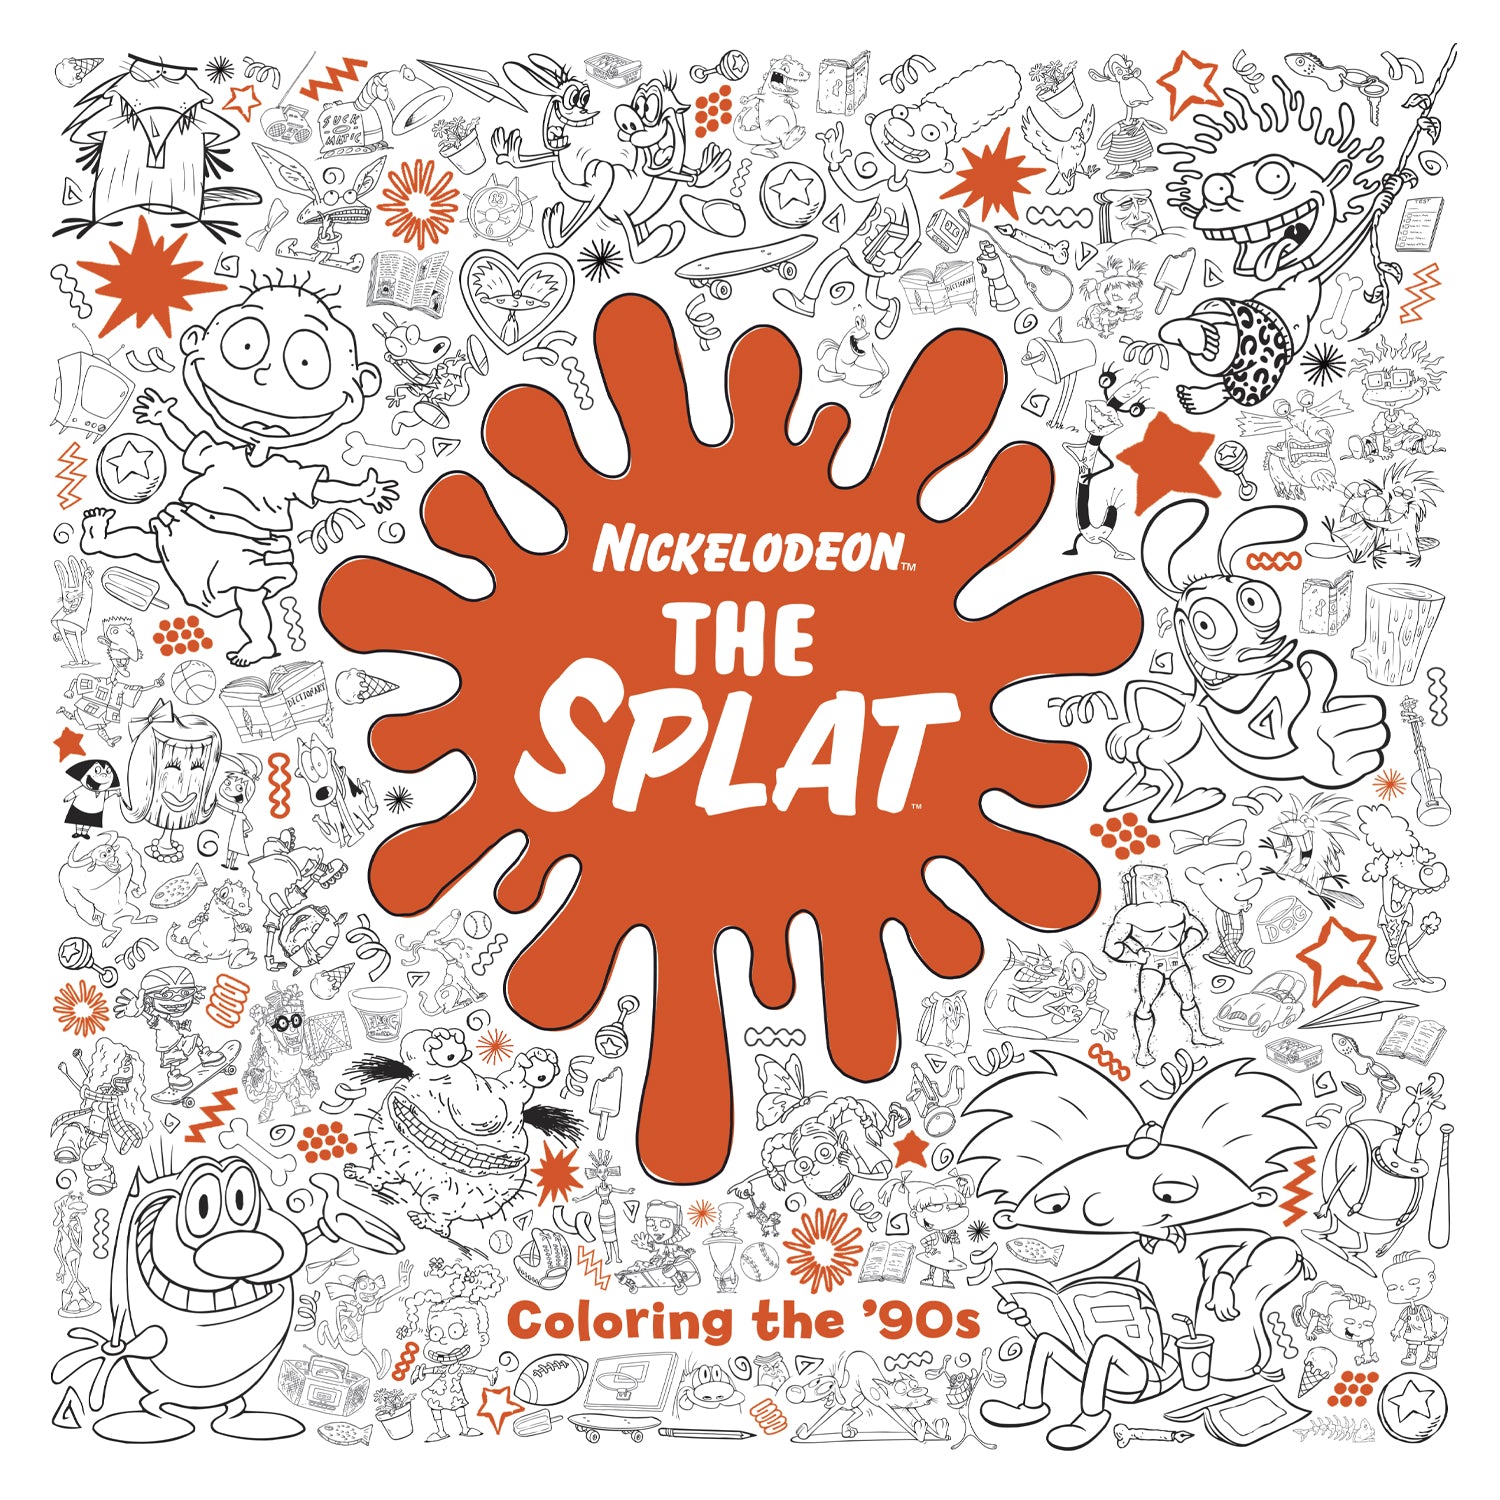 The Splat: Coloring the 90's Nickelodeon